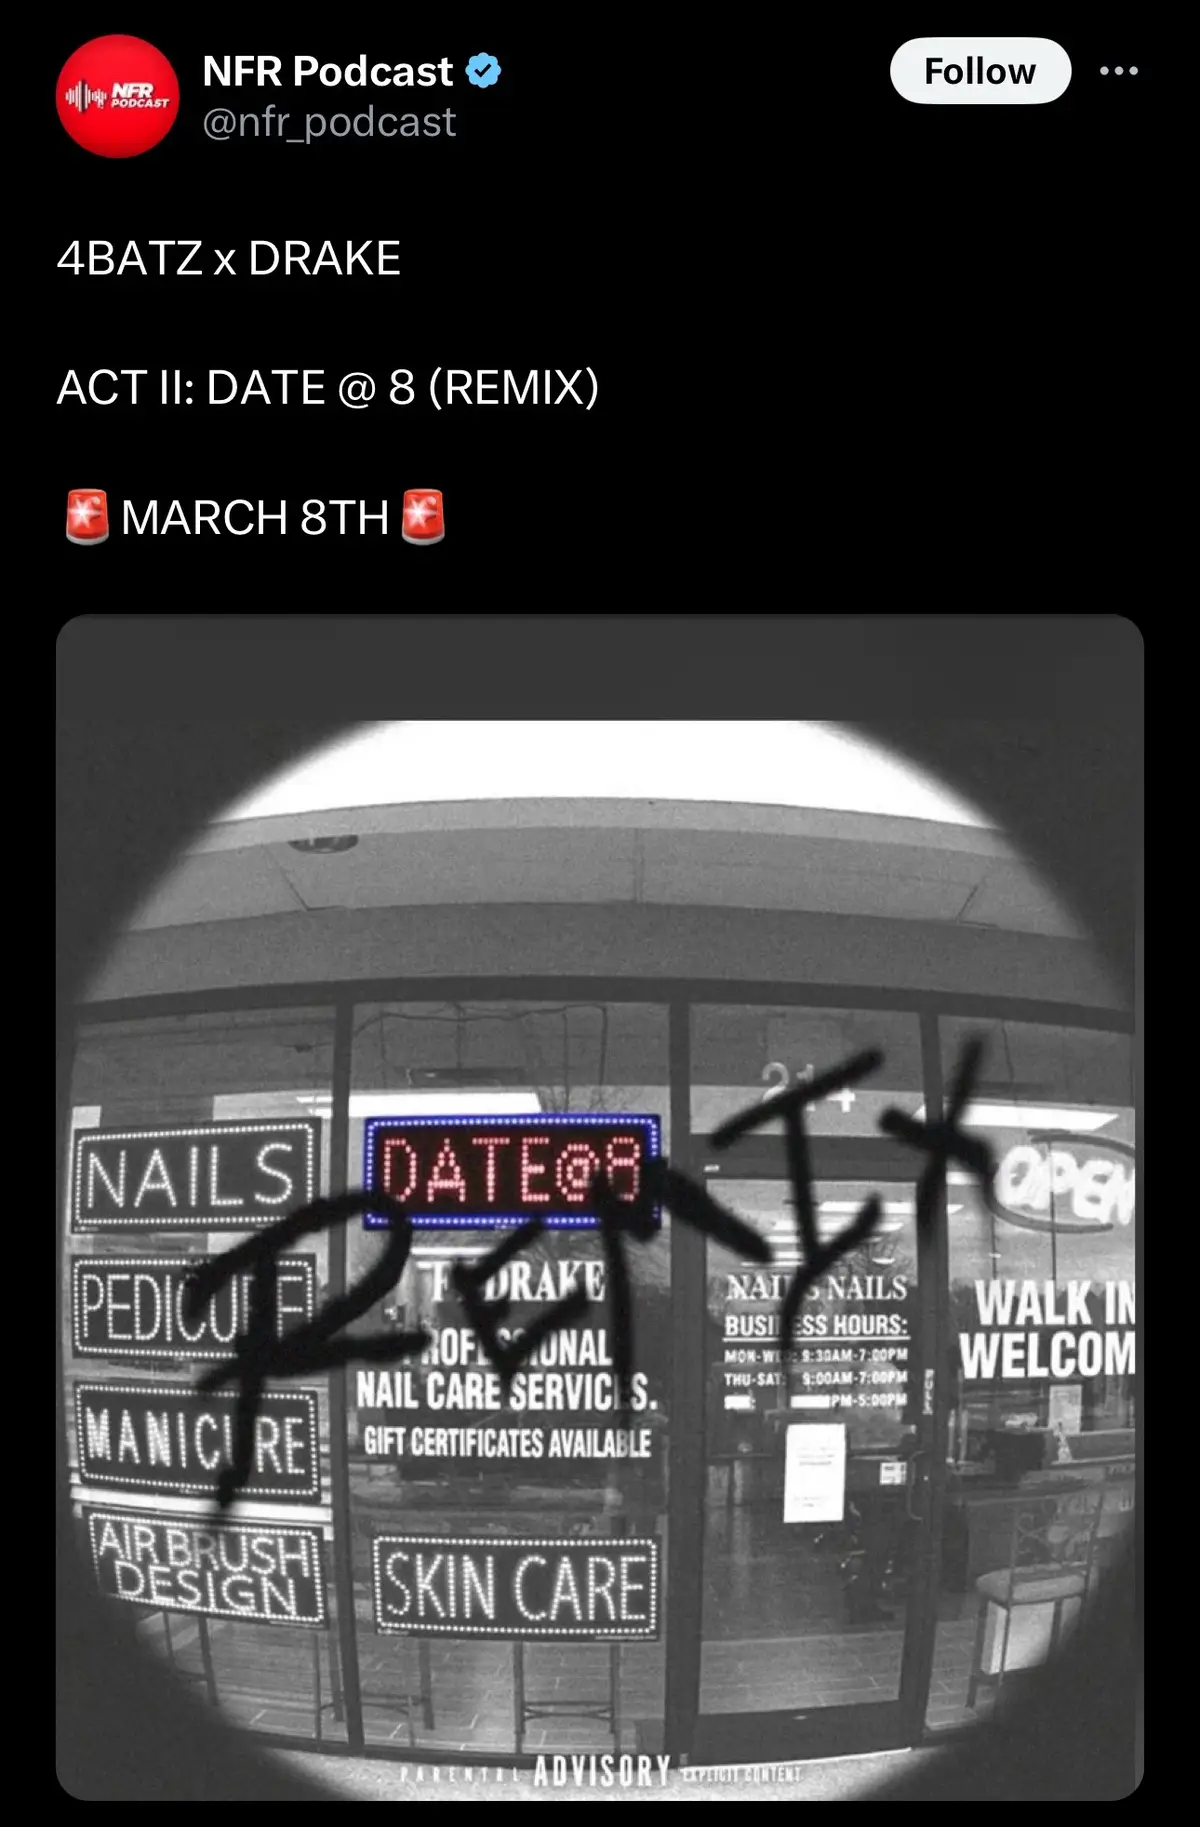 Here’s a new segment to keep the news coming daily. Quick Headlines will be added as a playlist once TikTok gives me the feature.  1: FRIDAY. #4batz, the industry’s newest lightning in a bottle has secured the #Drake feature. Act II: Date @ 8 (Remix) officially drops Friday.  2: When #NickiMinaj first hit the scene, #DebAtney had a big hand in her management. As Nicki’s career progressed, they cut ties in… not the nicest of ways. It’s been recently revealed the #pinkfriday2tour is managed by her. Round of applause.  3: Speaking of round of applause, Congrats to #KodakBlack ! Glad to see he’s out to see his new baby.  #raptok #raptalk #tejadaland #headlined 